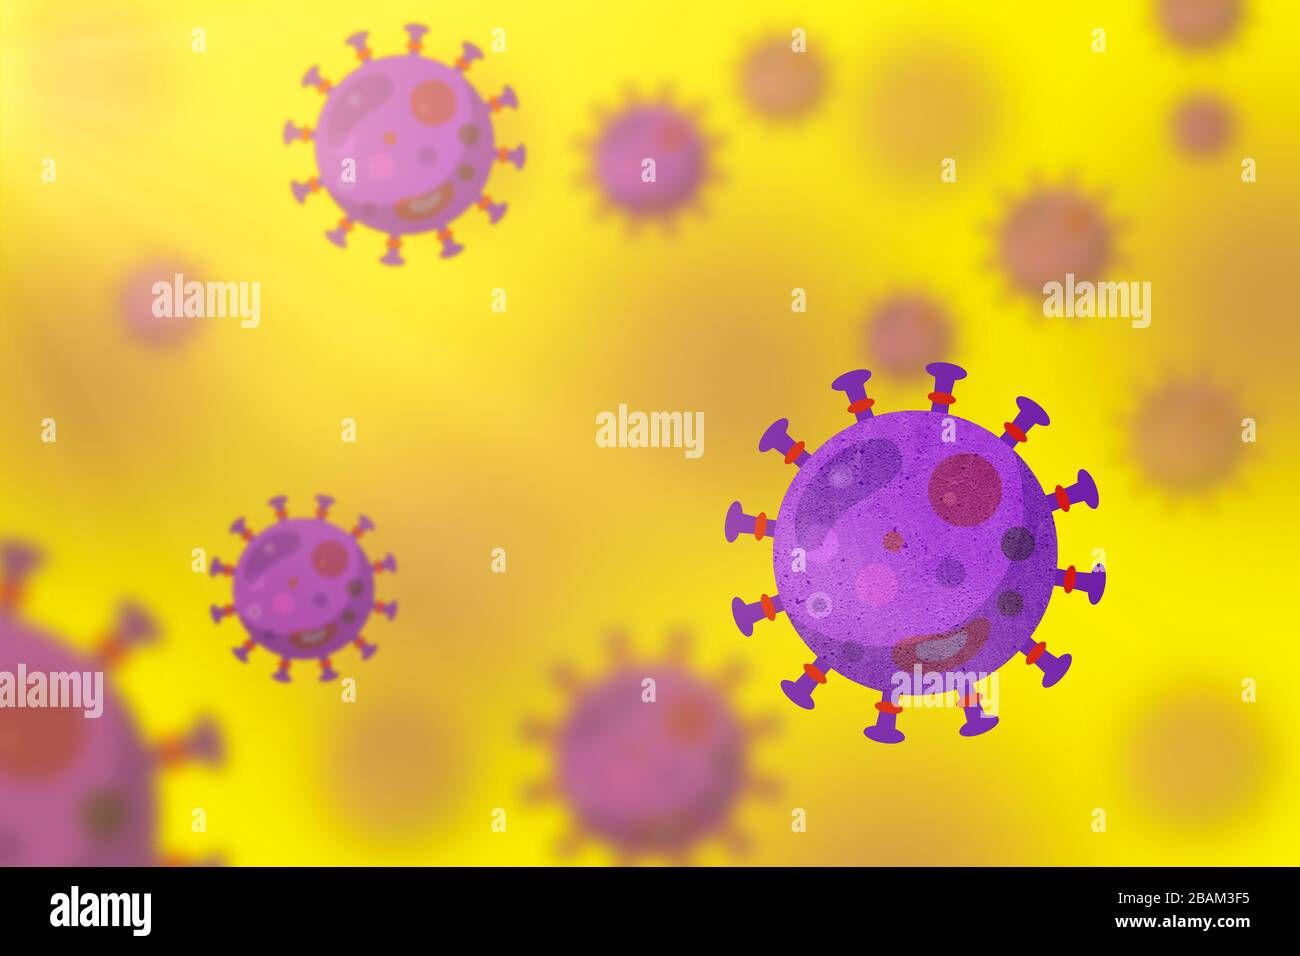 Virus or bacteria infection concept background. Coronavirus or COVID-19 concept Stock Photo